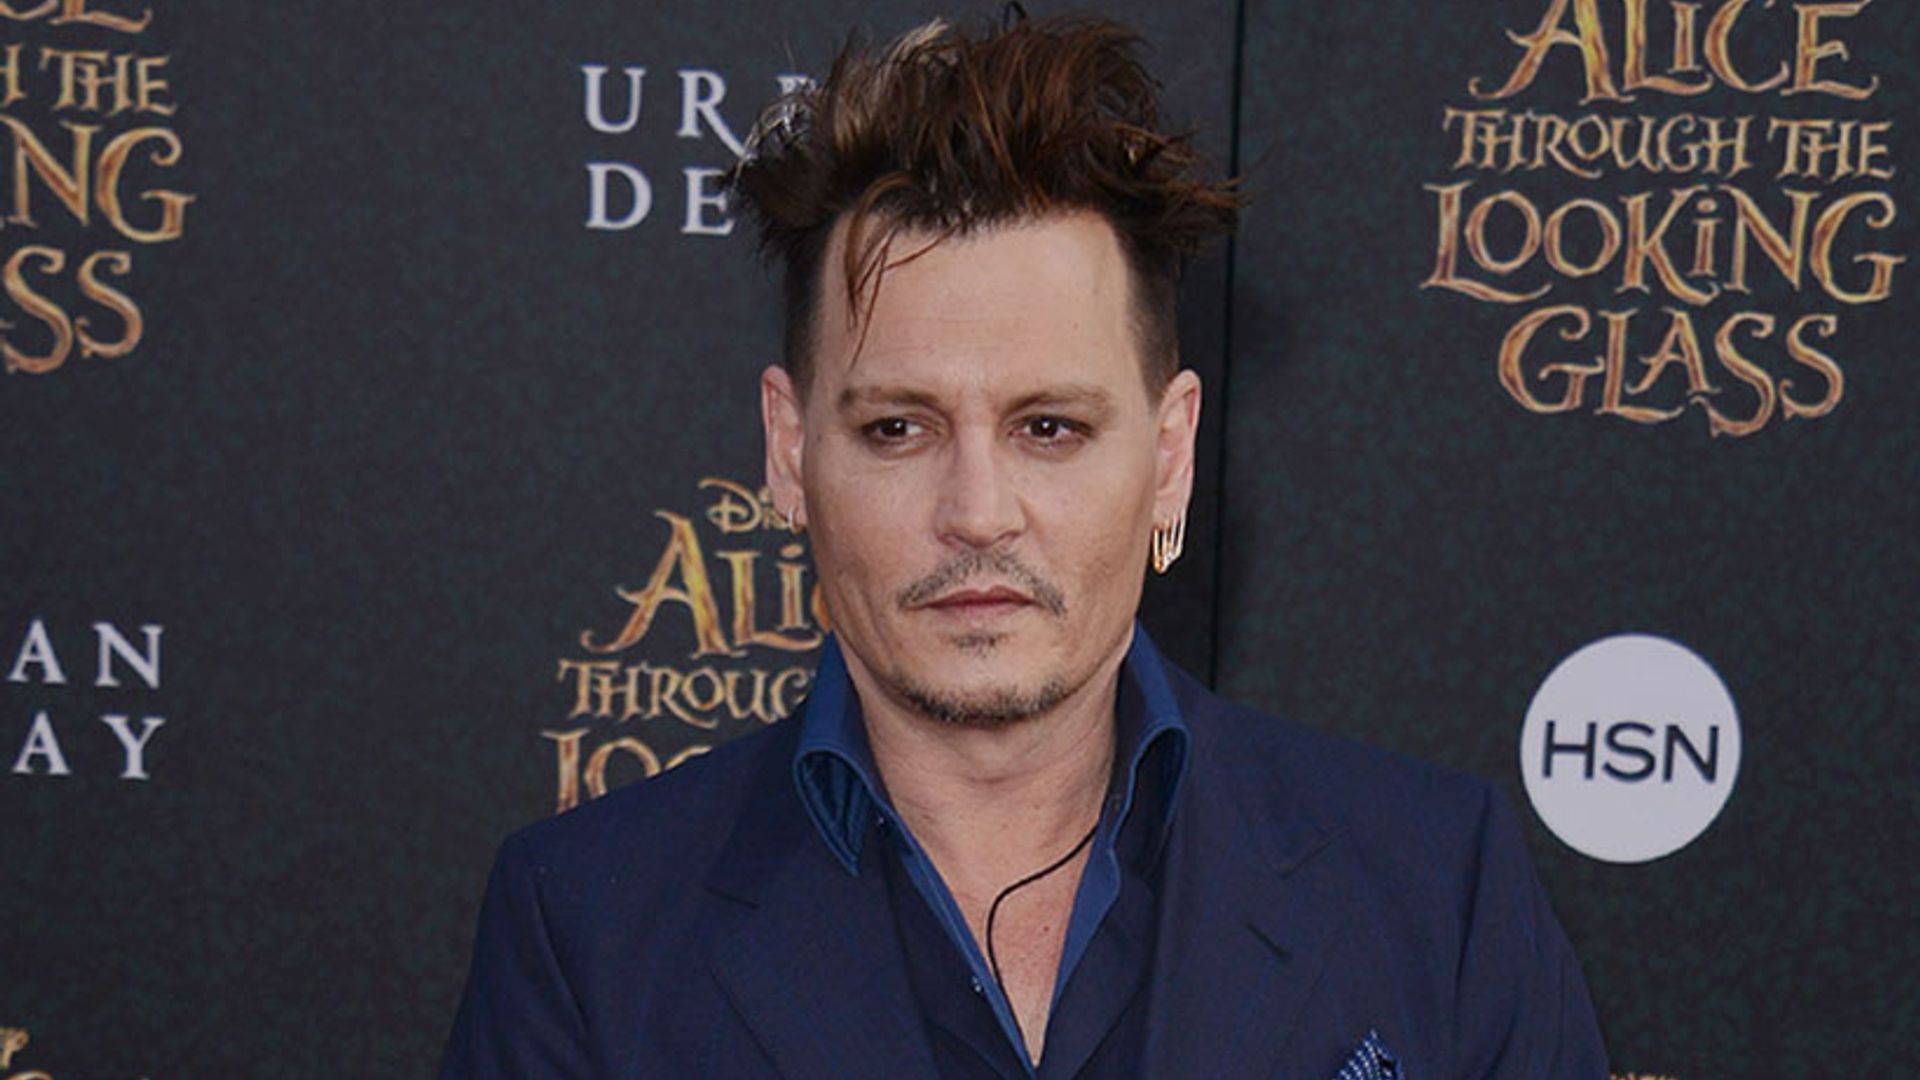 Has Johnny Depp bagged a role in Harry Potter spin-off?